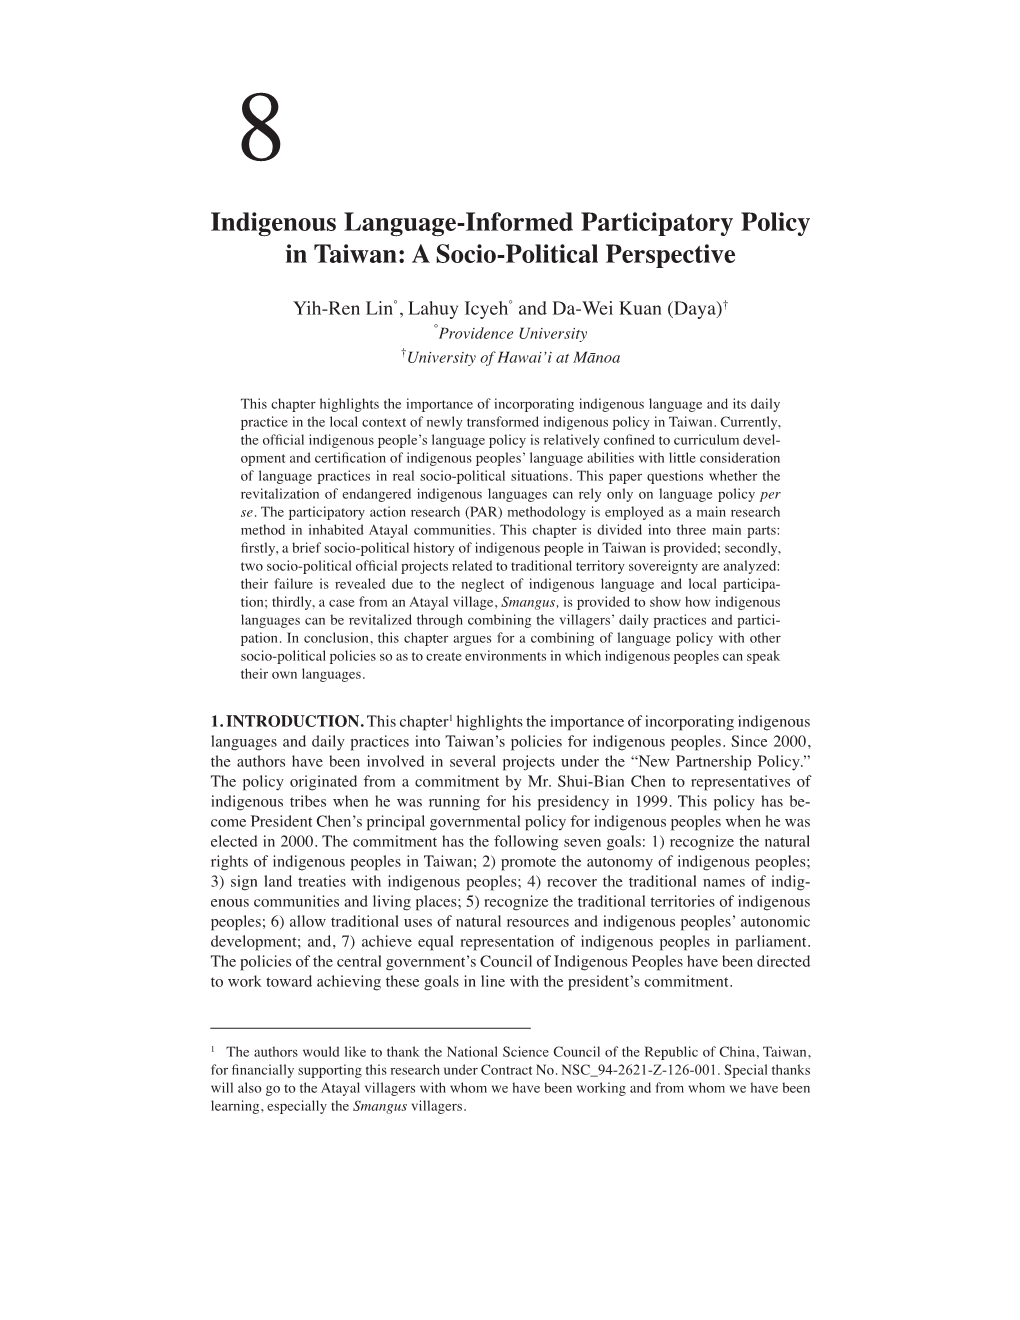 Indigenous Language-Informed Participatory Policy in Taiwan: a Socio-Political Perspective